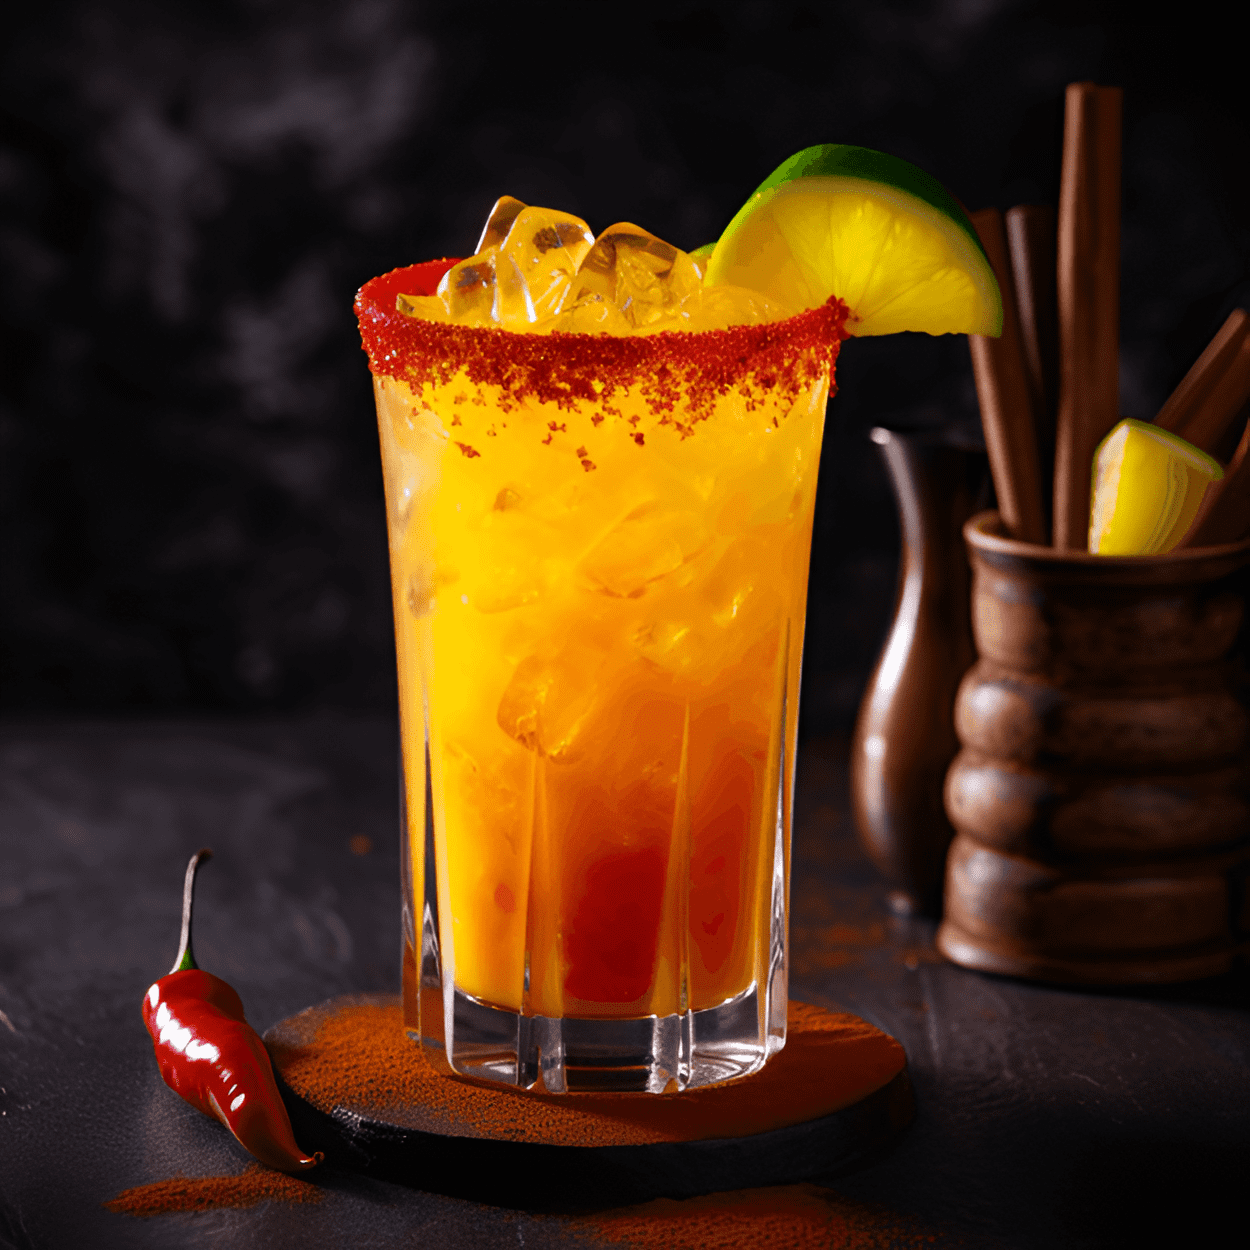 Mexican Lollipop Cocktail Recipe - The Mexican Lollipop is a tantalizing blend of sweet and spicy. The sweetness of the pineapple juice and grenadine is perfectly balanced by the heat of the chili powder and tequila. It's a bold, vibrant, and exciting cocktail that leaves a lingering spicy aftertaste.